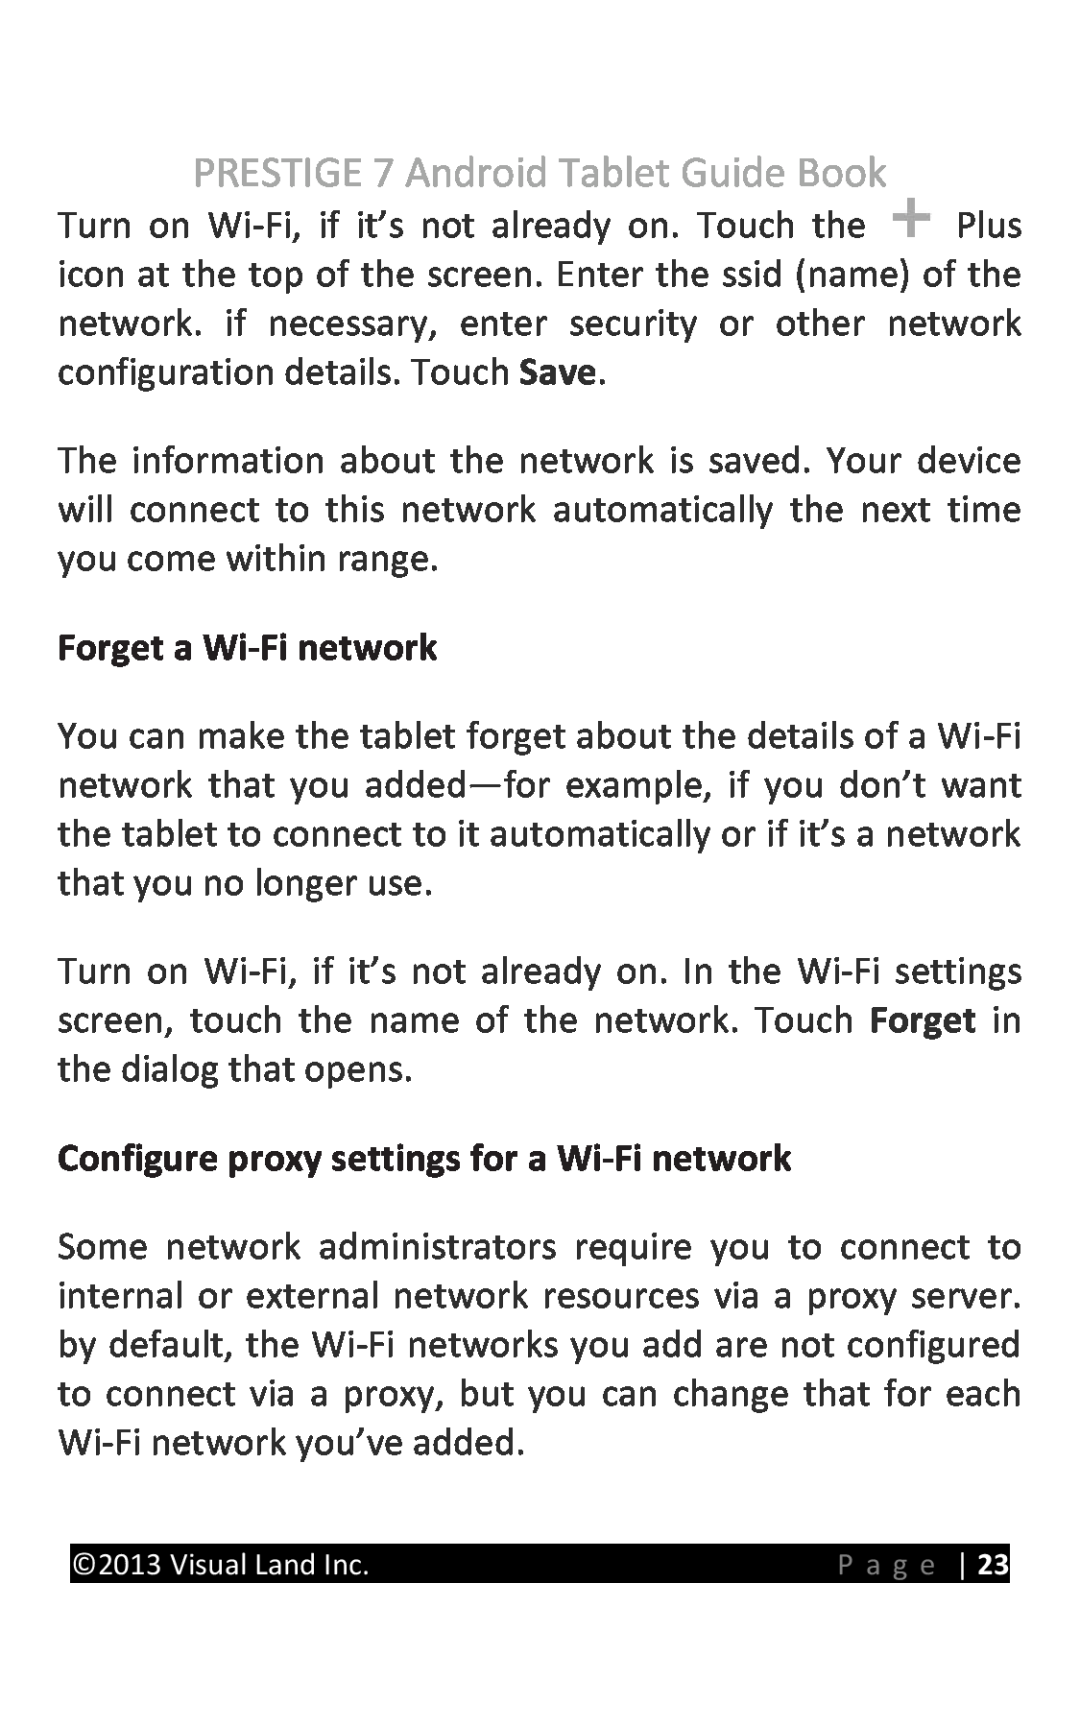 Visual Land Forget a Wi-Fi network, Configure proxy settings for a Wi-Fi network, PRESTIGE 7 Android Tablet Guide Book 